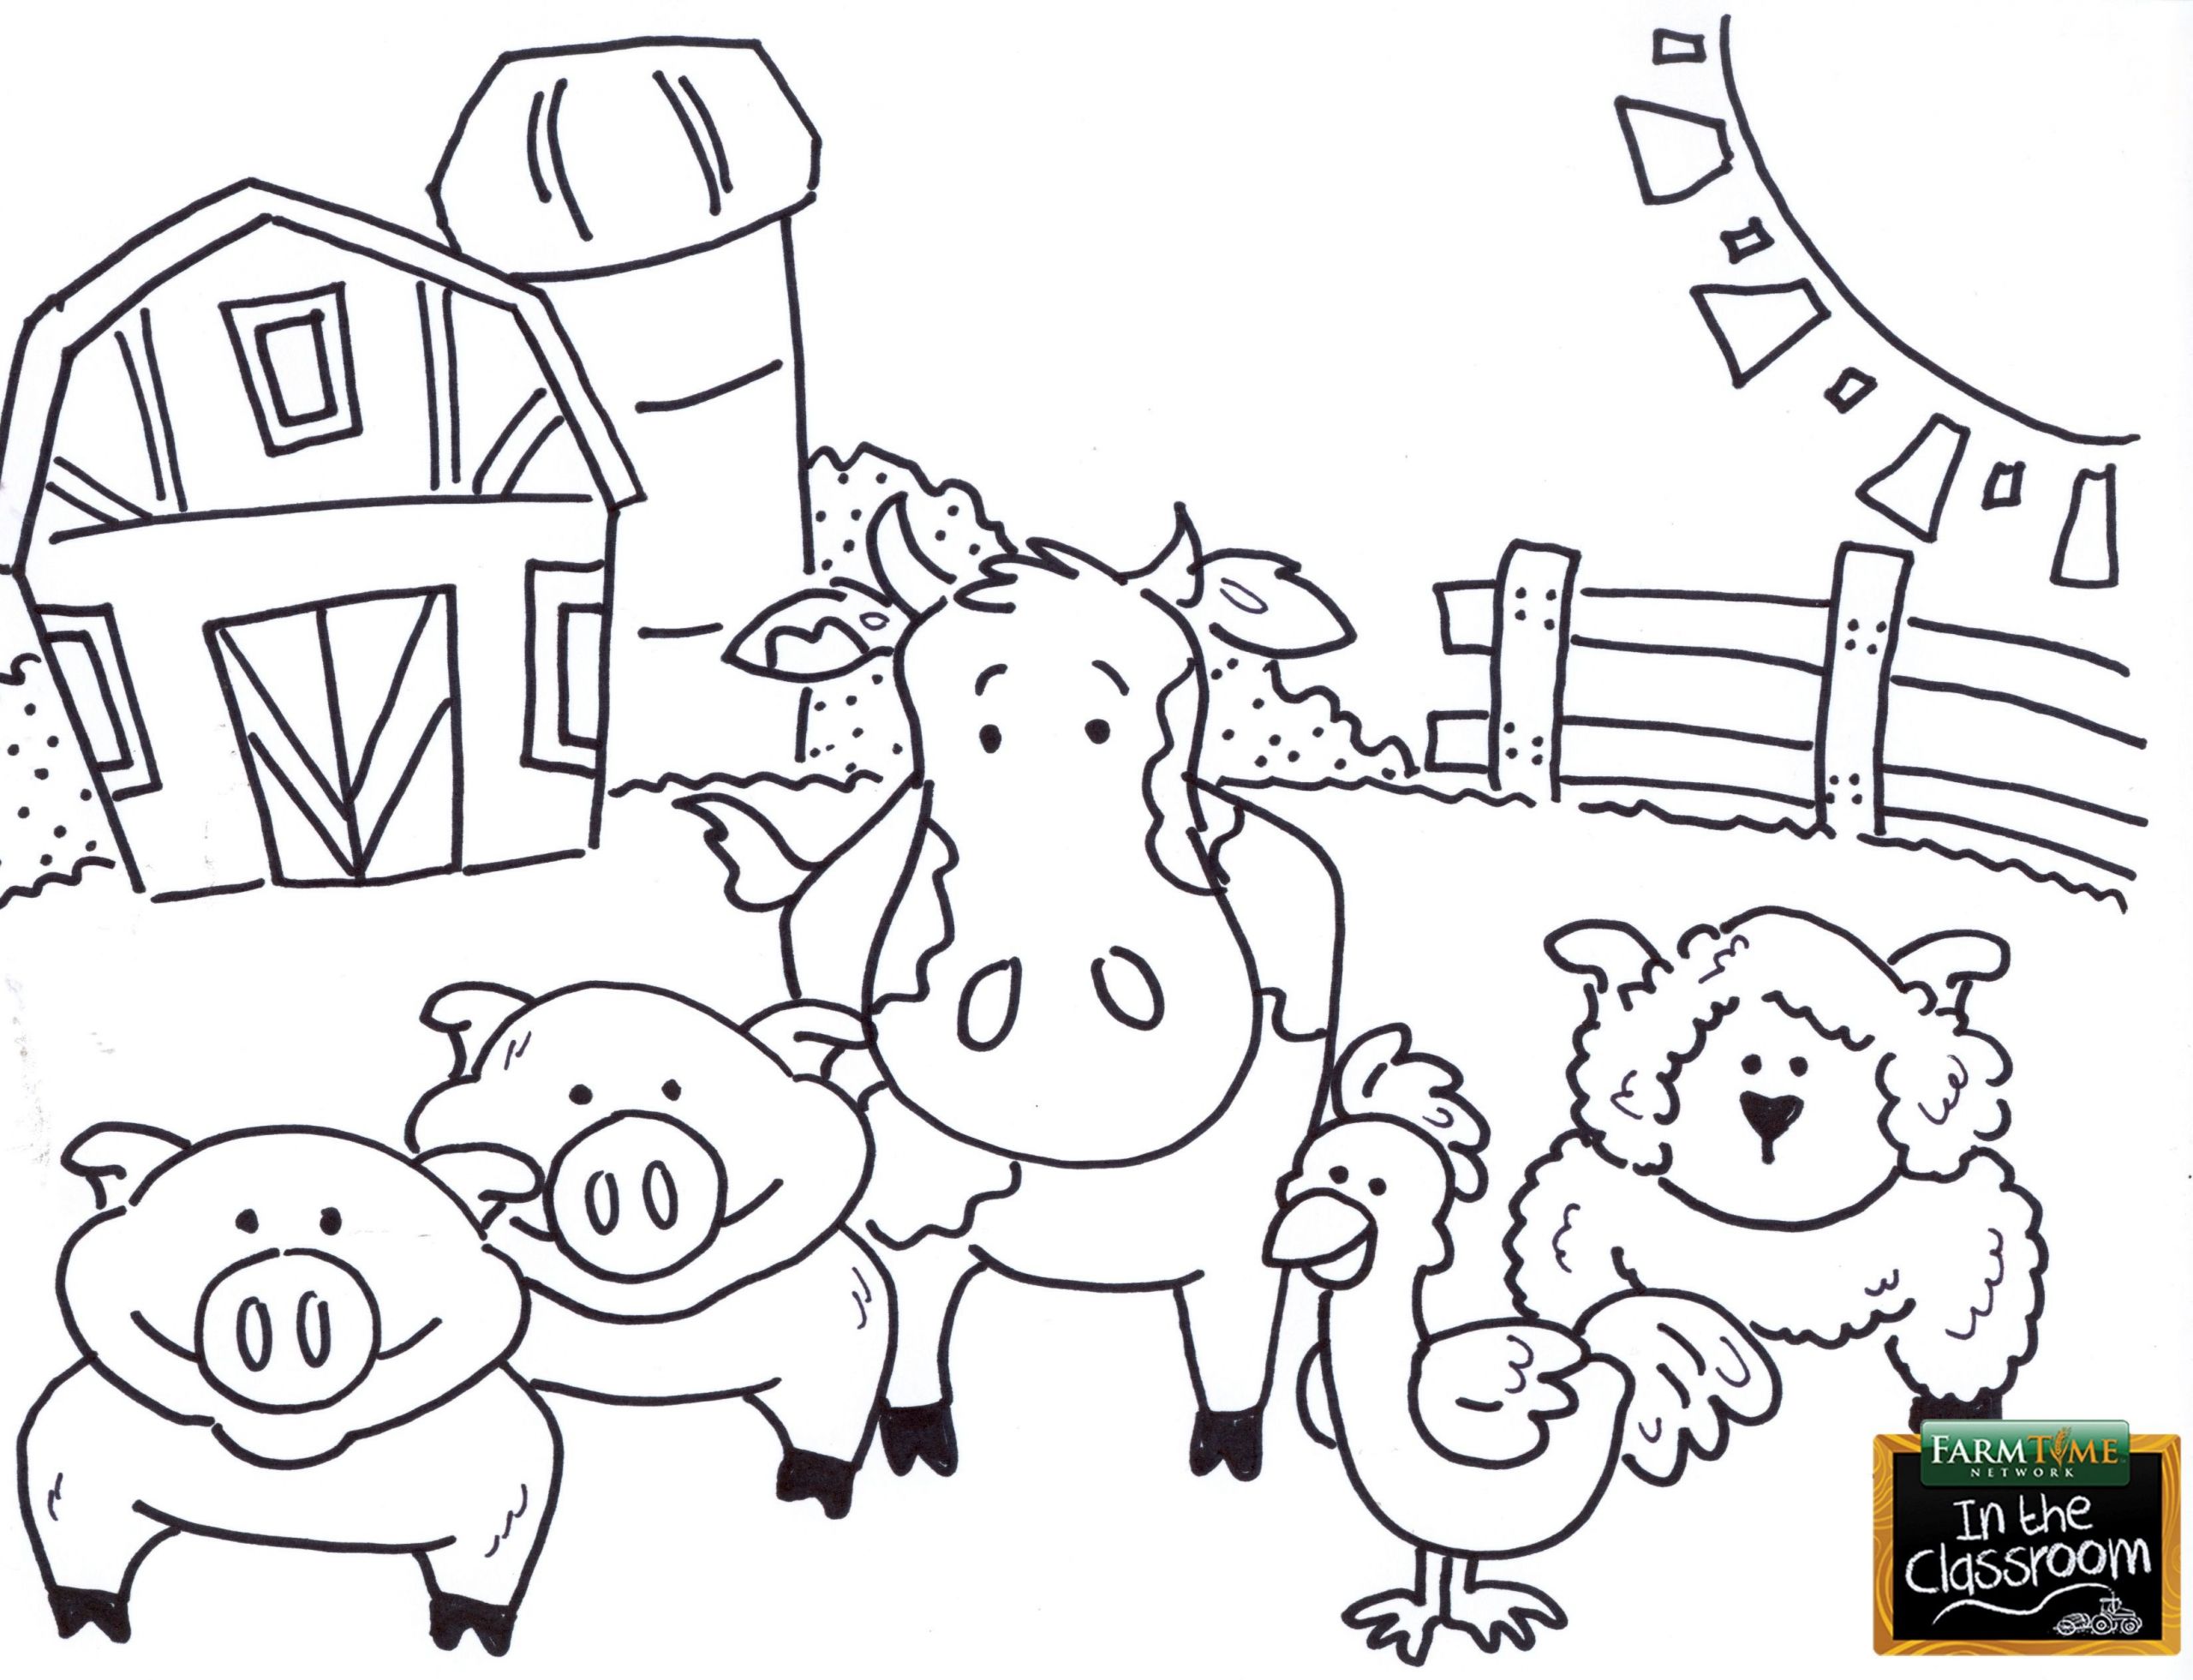 Free Printable Farm Animal Coloring Pages
 Pin by Caiah Wagner on Agriculture